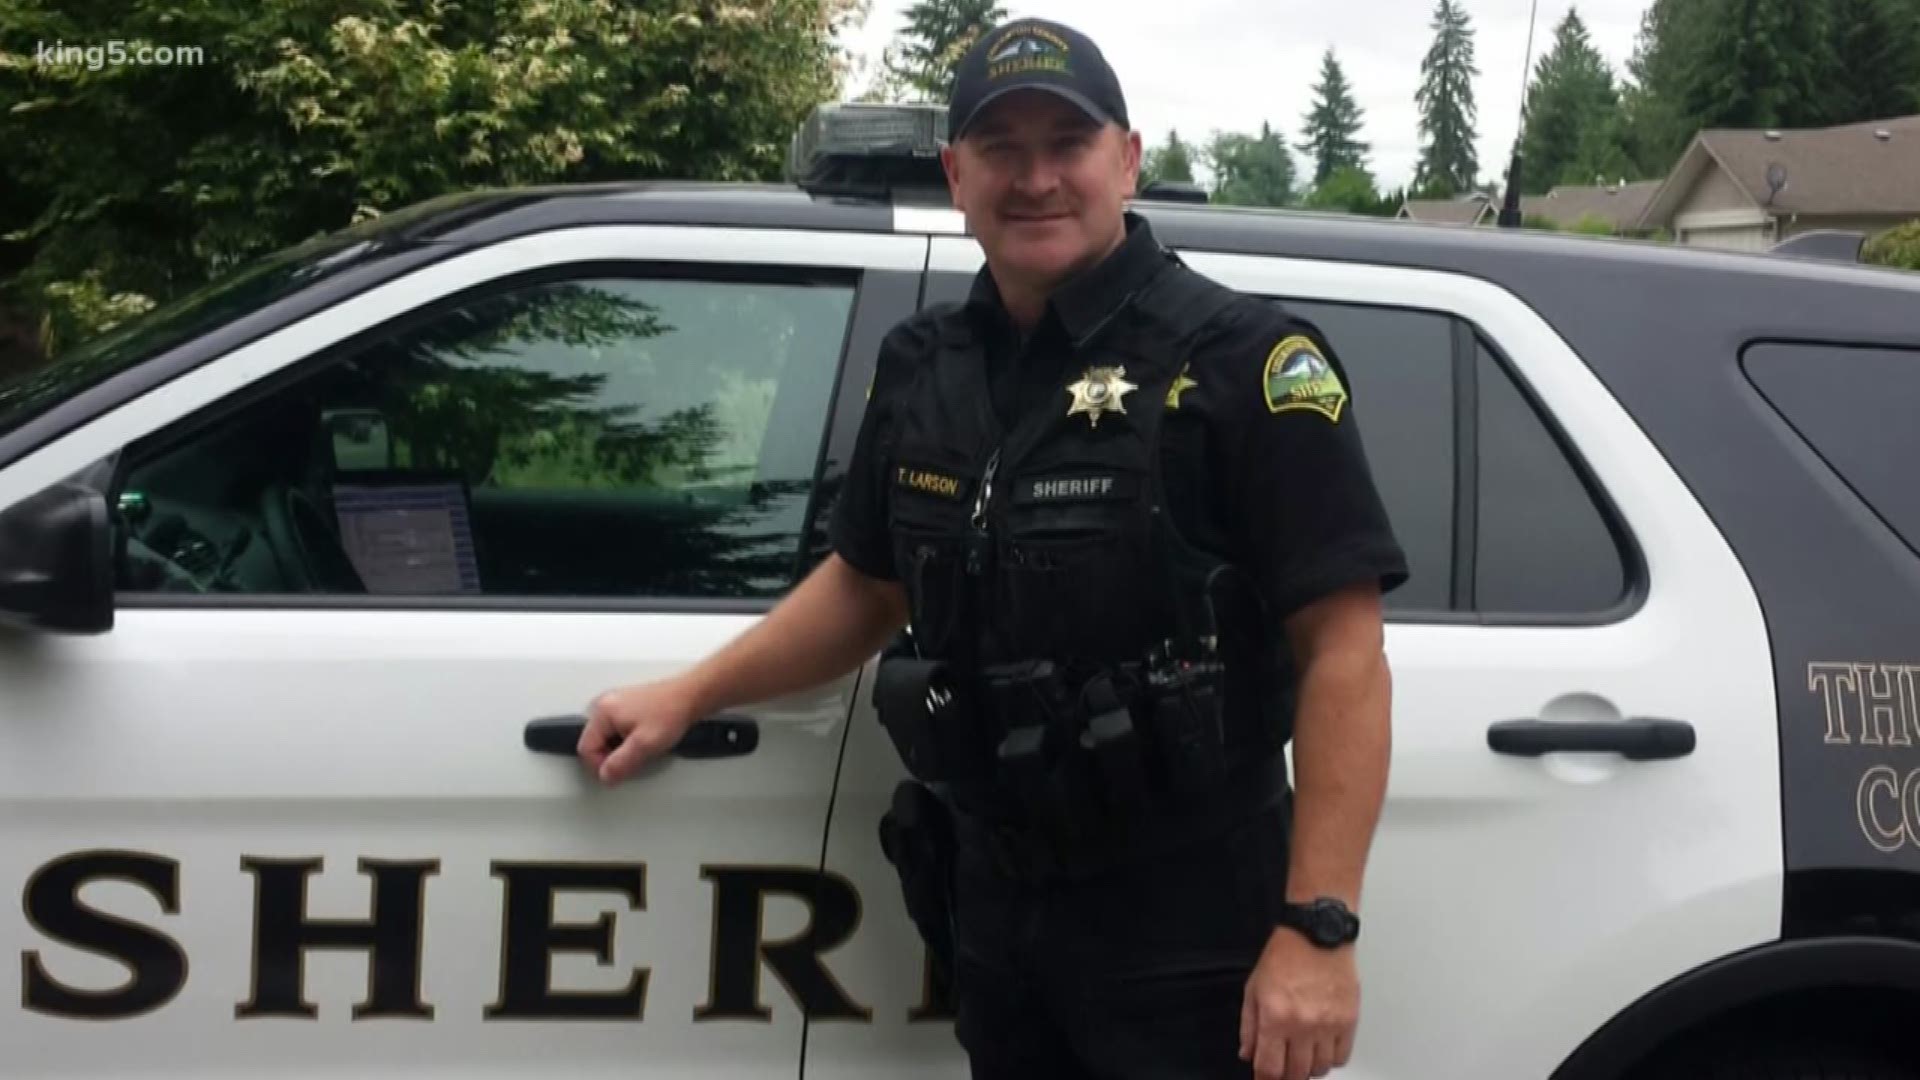 The family of a Thurston County Deputy is asking for your prayers after Deputy Troy Larson suffered a stroke last week. He is now in a coma at Harborview.